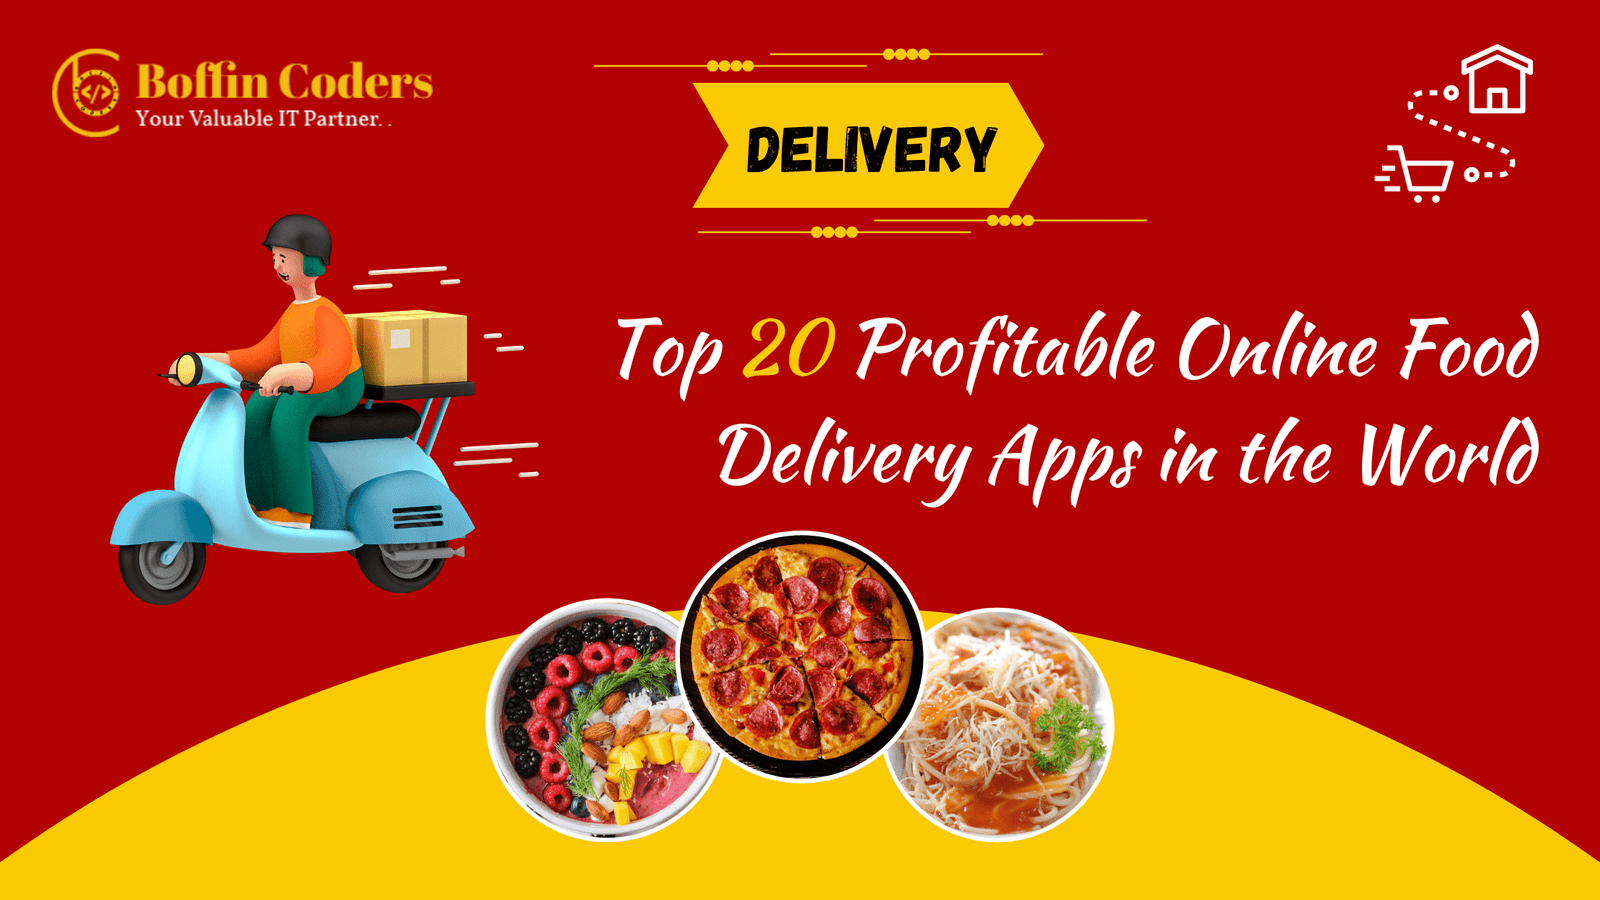 Top 20 Profitable Online Food Delivery Apps in the World